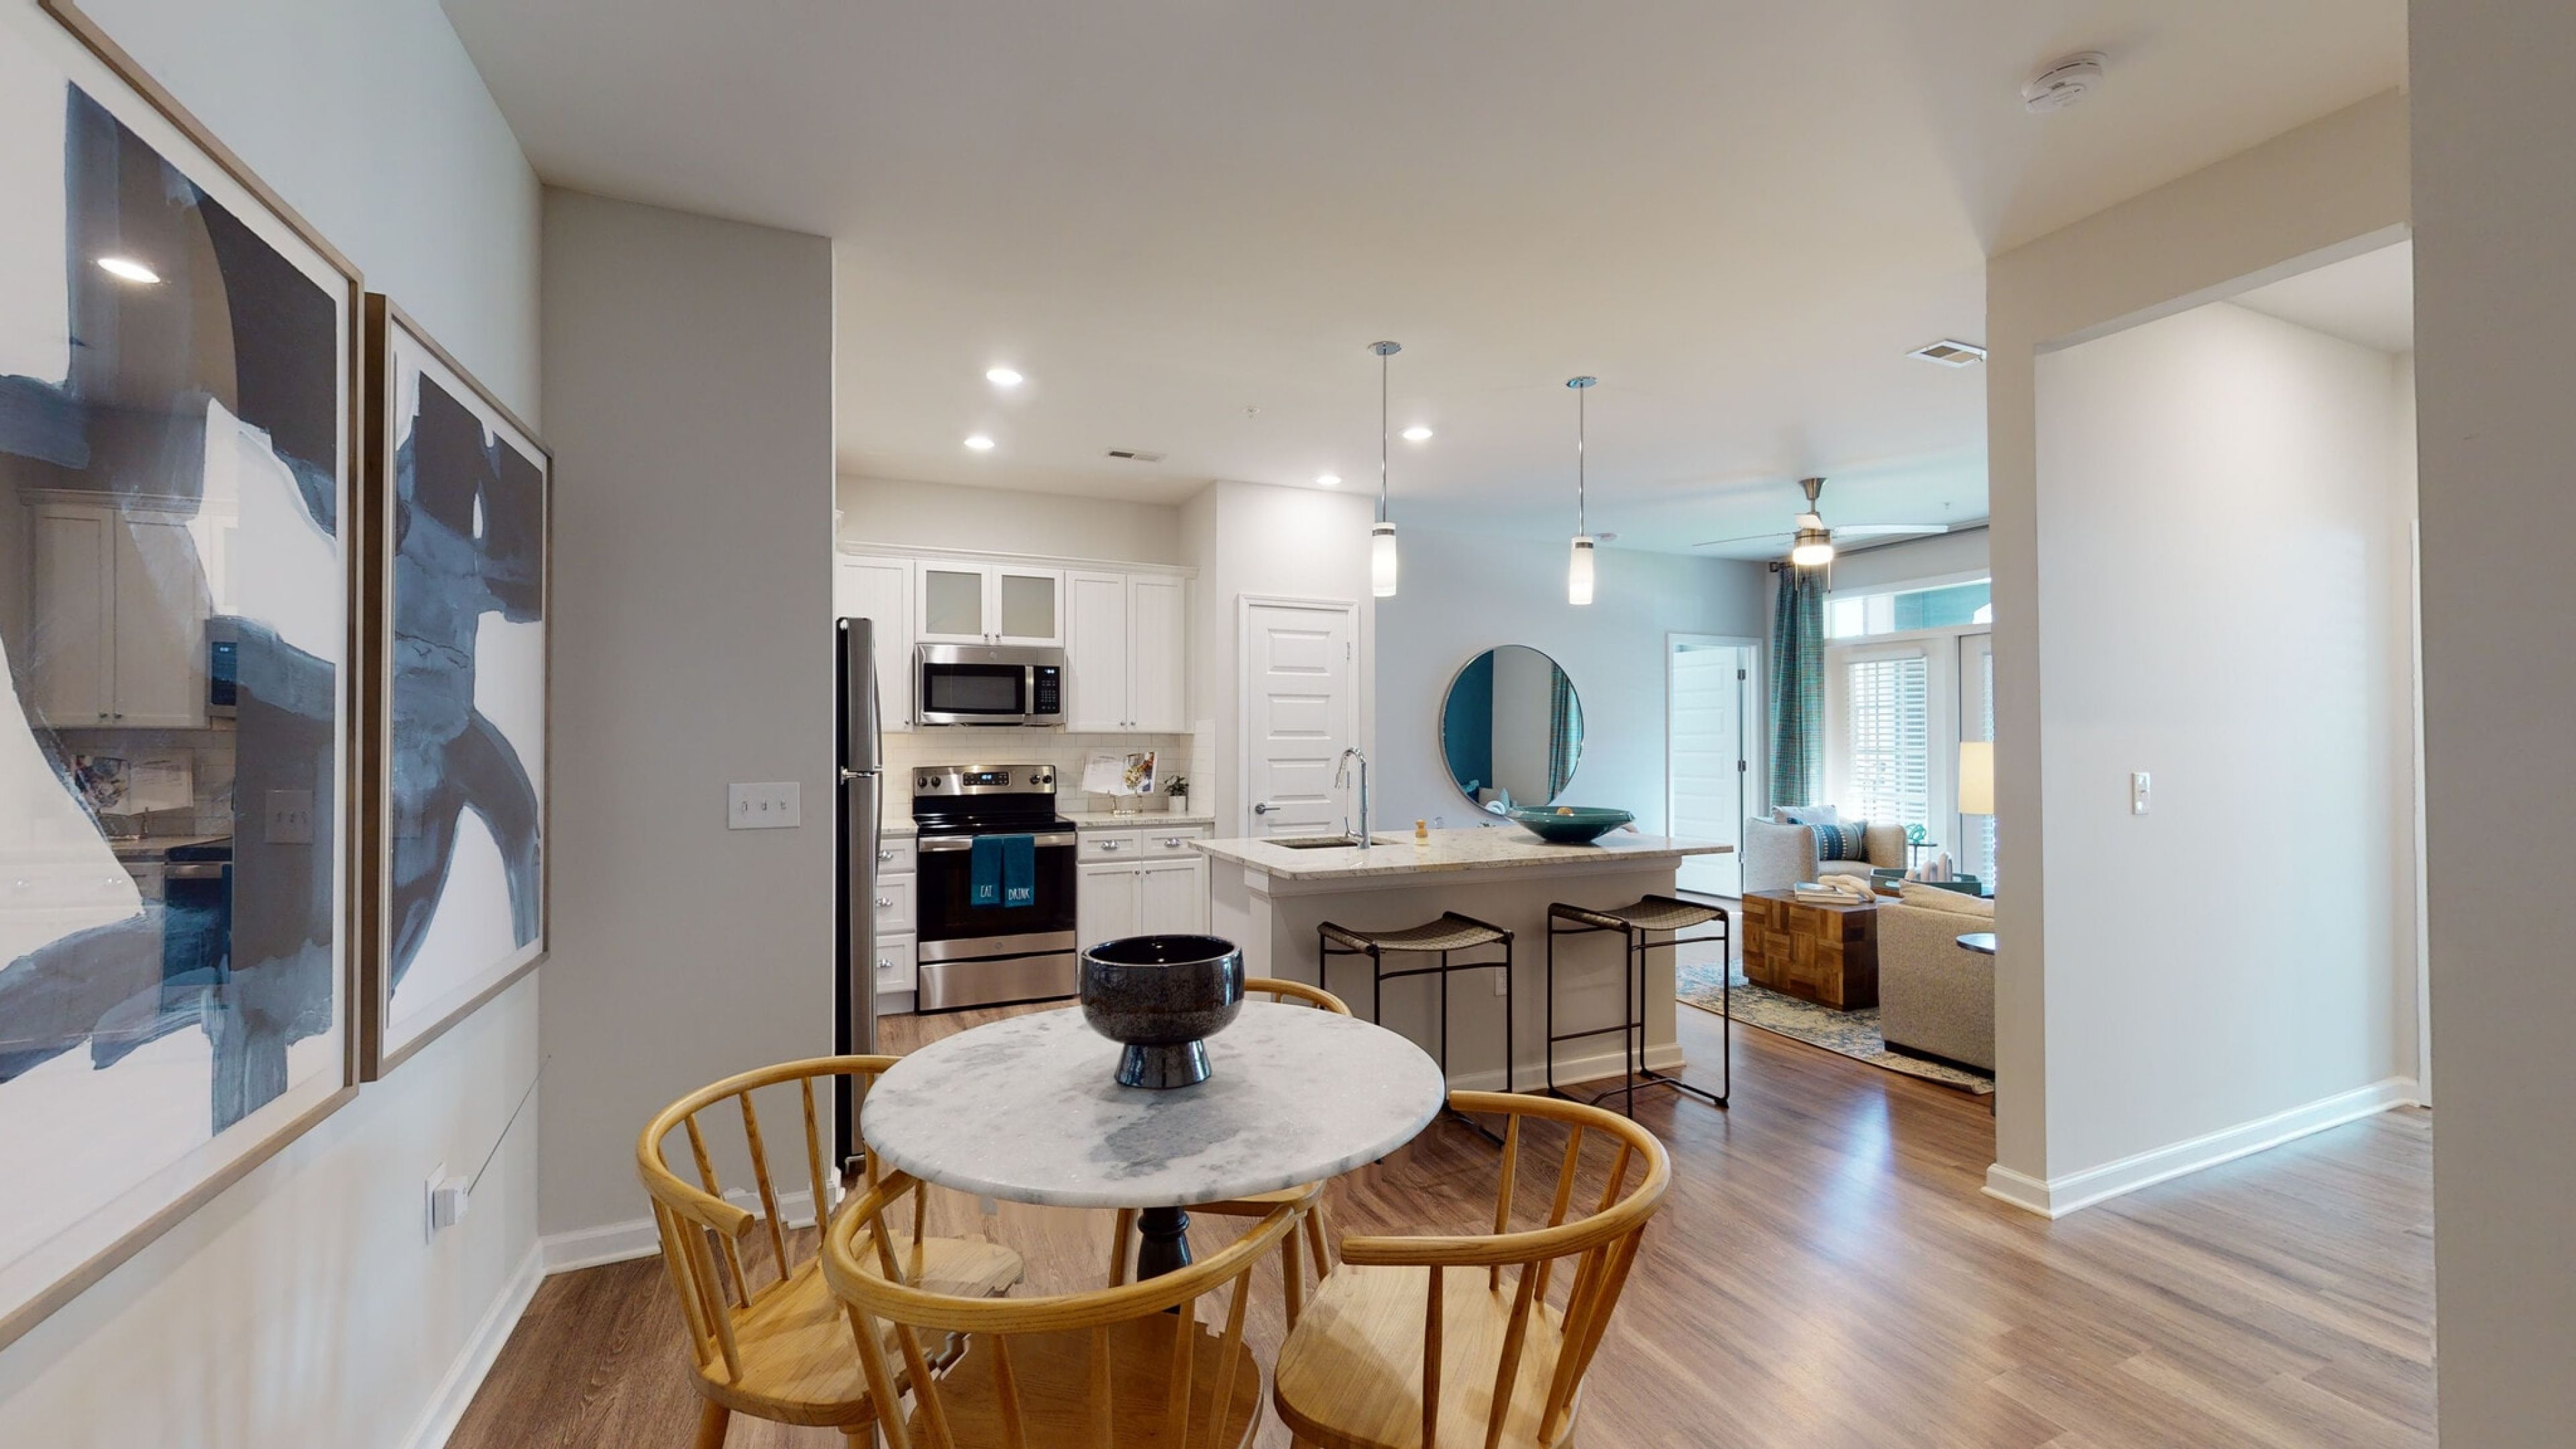 Hawthorne at Westport luxury apartment kitchen with stainless steel appliances, custom cabinetry, and a kitchen island with granite countertops